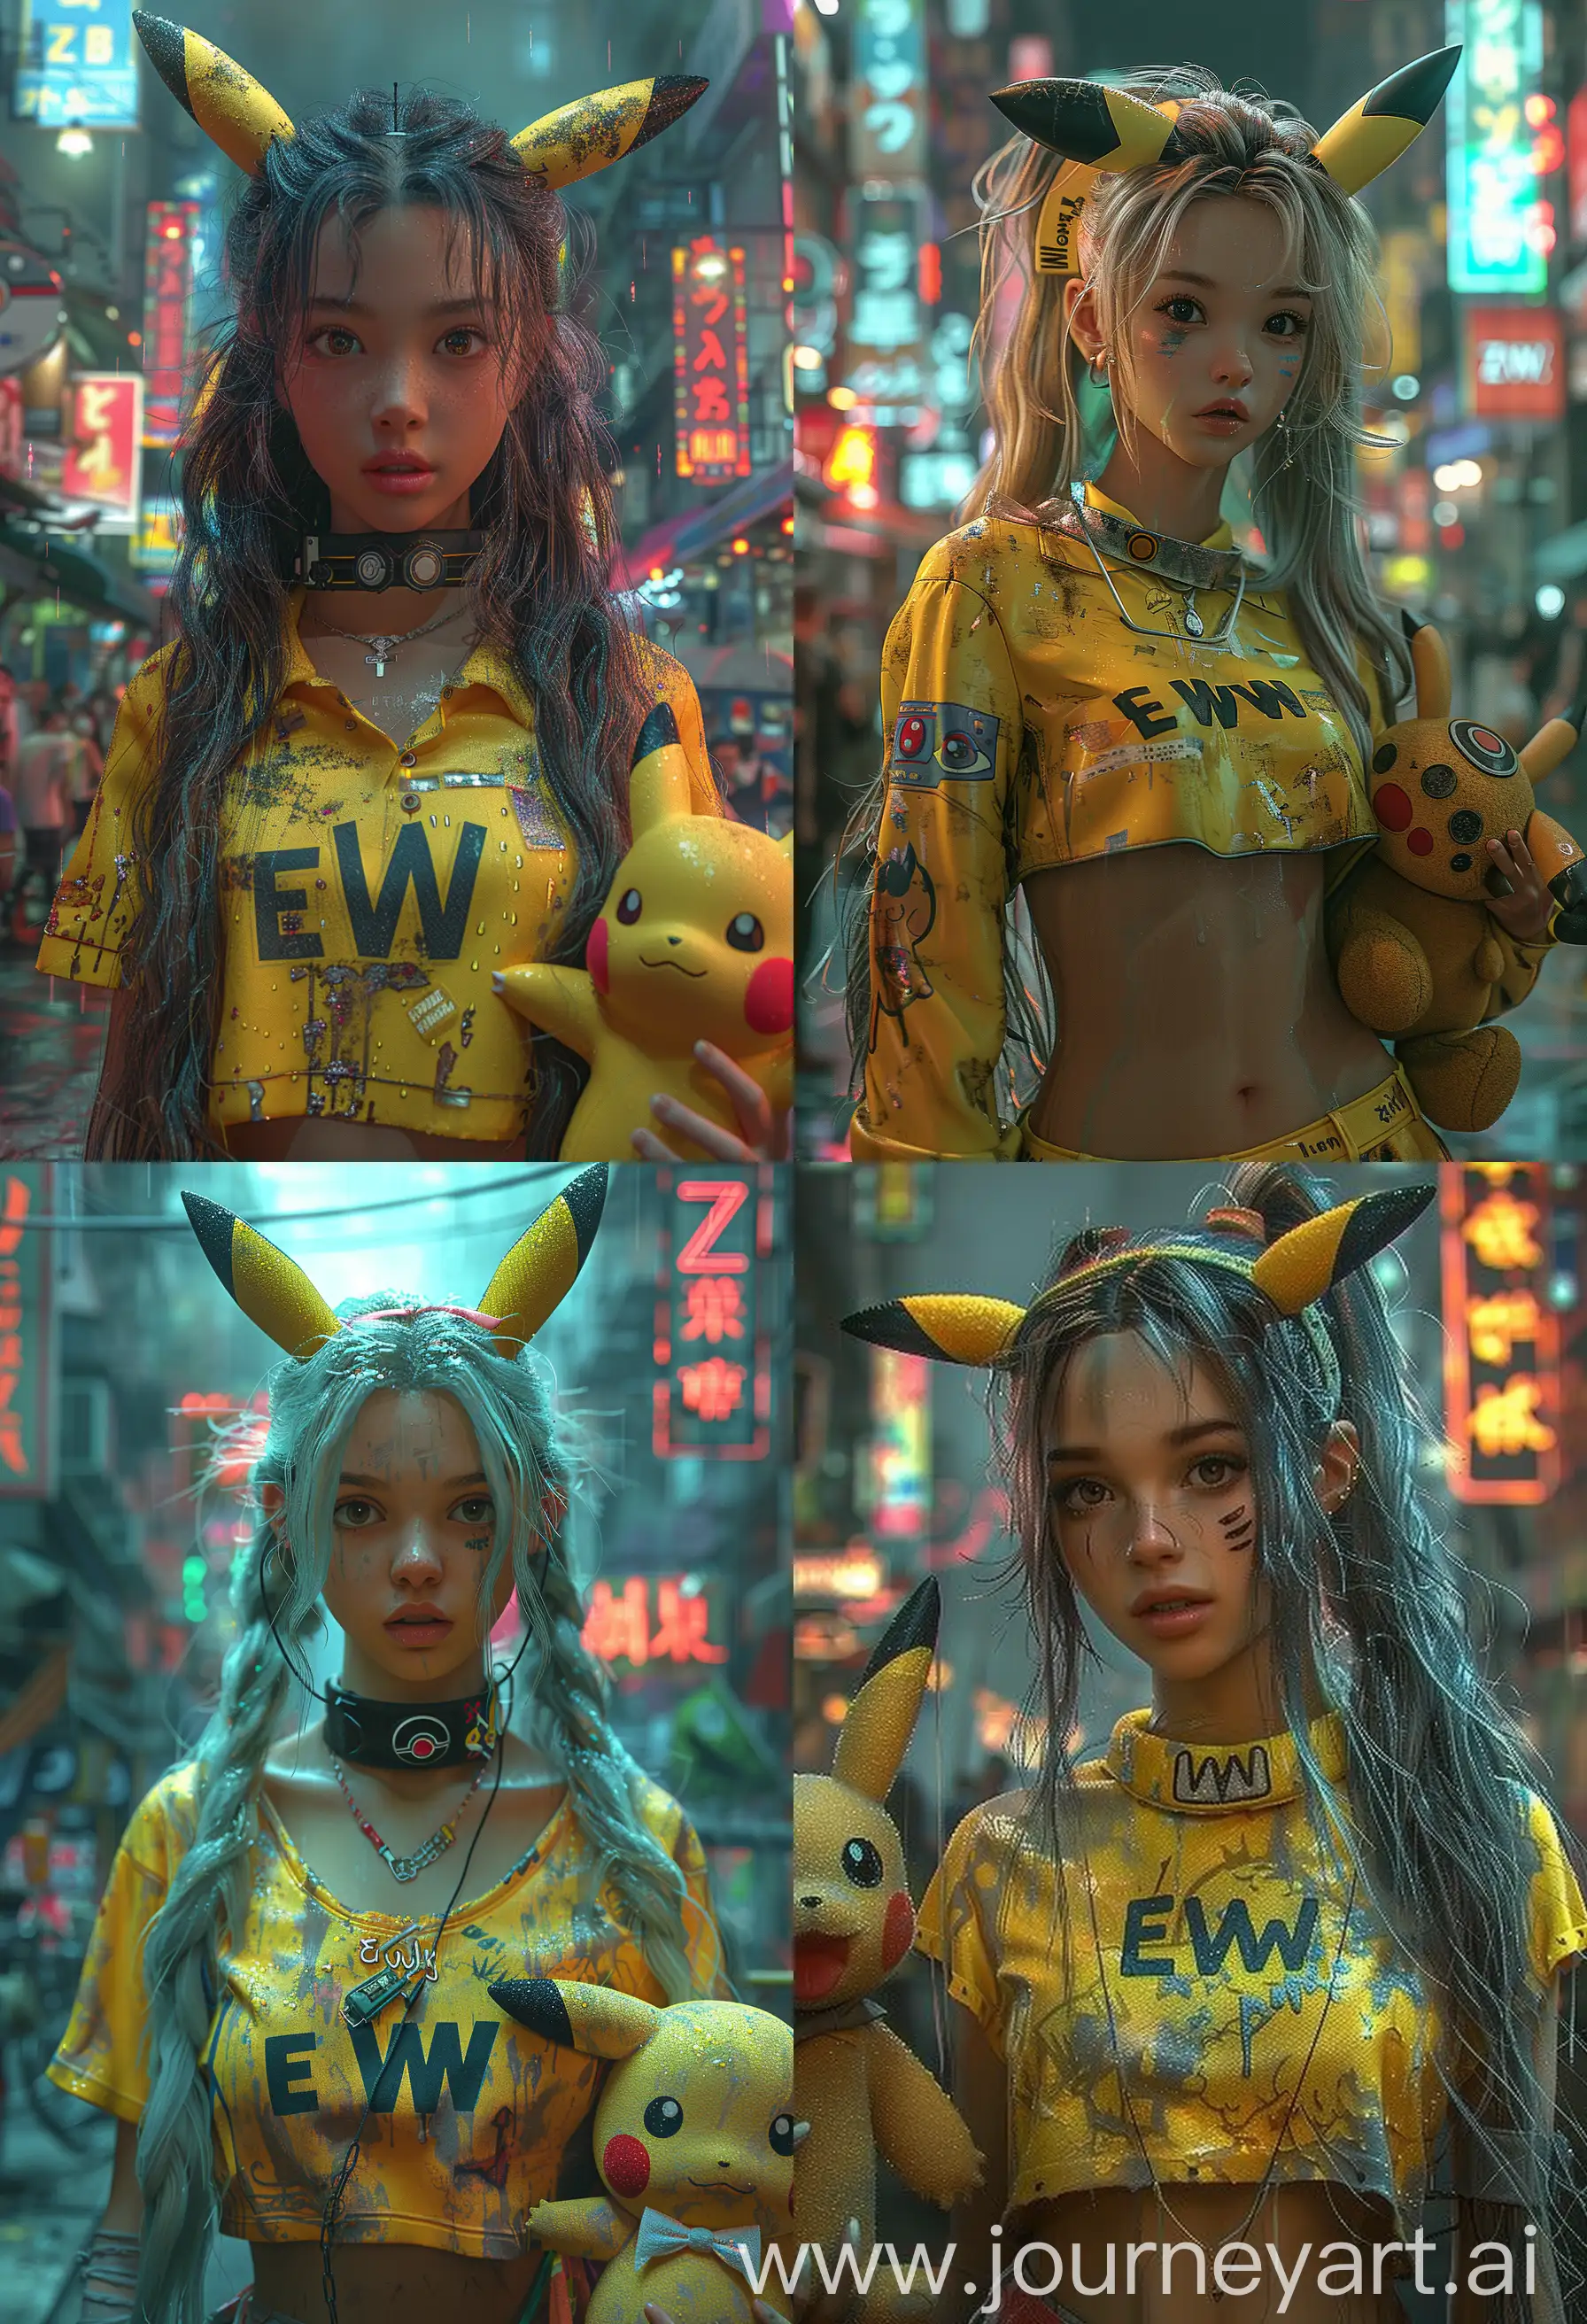 Ultra-Realistic-Anime-Character-in-Neon-City-with-Pikachu-Teddy